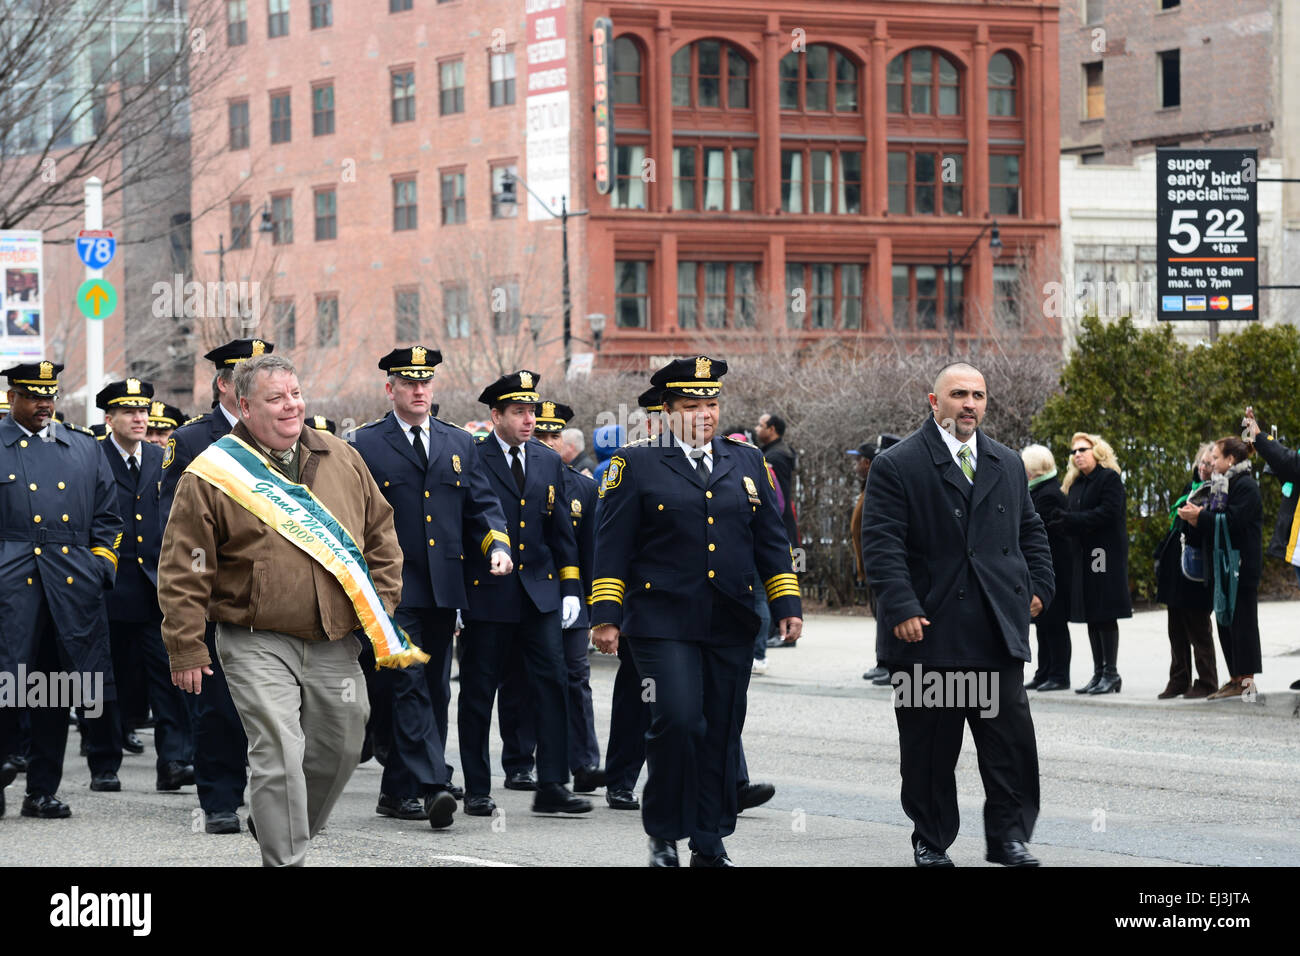 NPD and the then police director Sheilah Coley during the 2013 St. Patrick's Day parade. Newark, New Jersey. USA Stock Photo